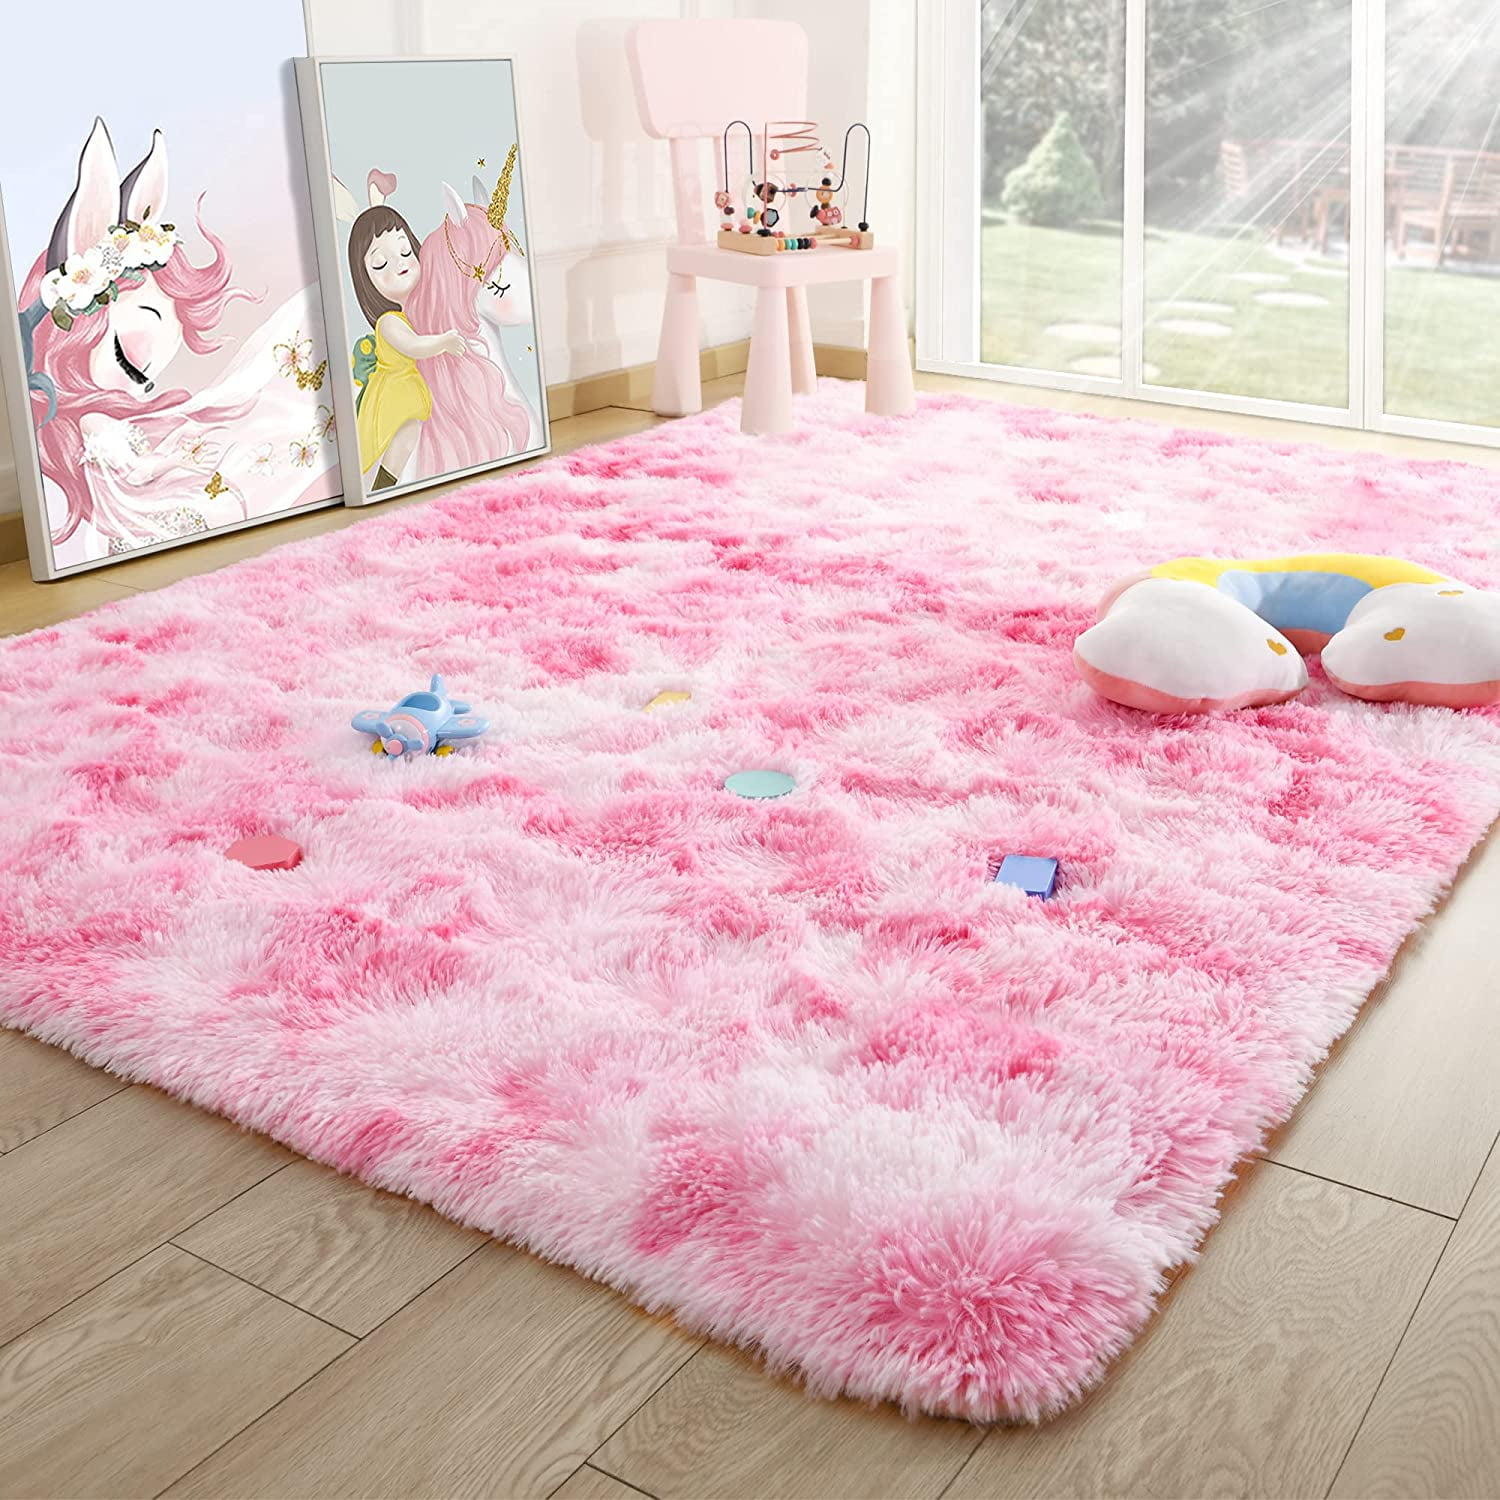 Twinnis Abstract Shag Rug For Bedroom Dyeing Fluffy Carpets For Kids 4 X6 Pink Walmart Com